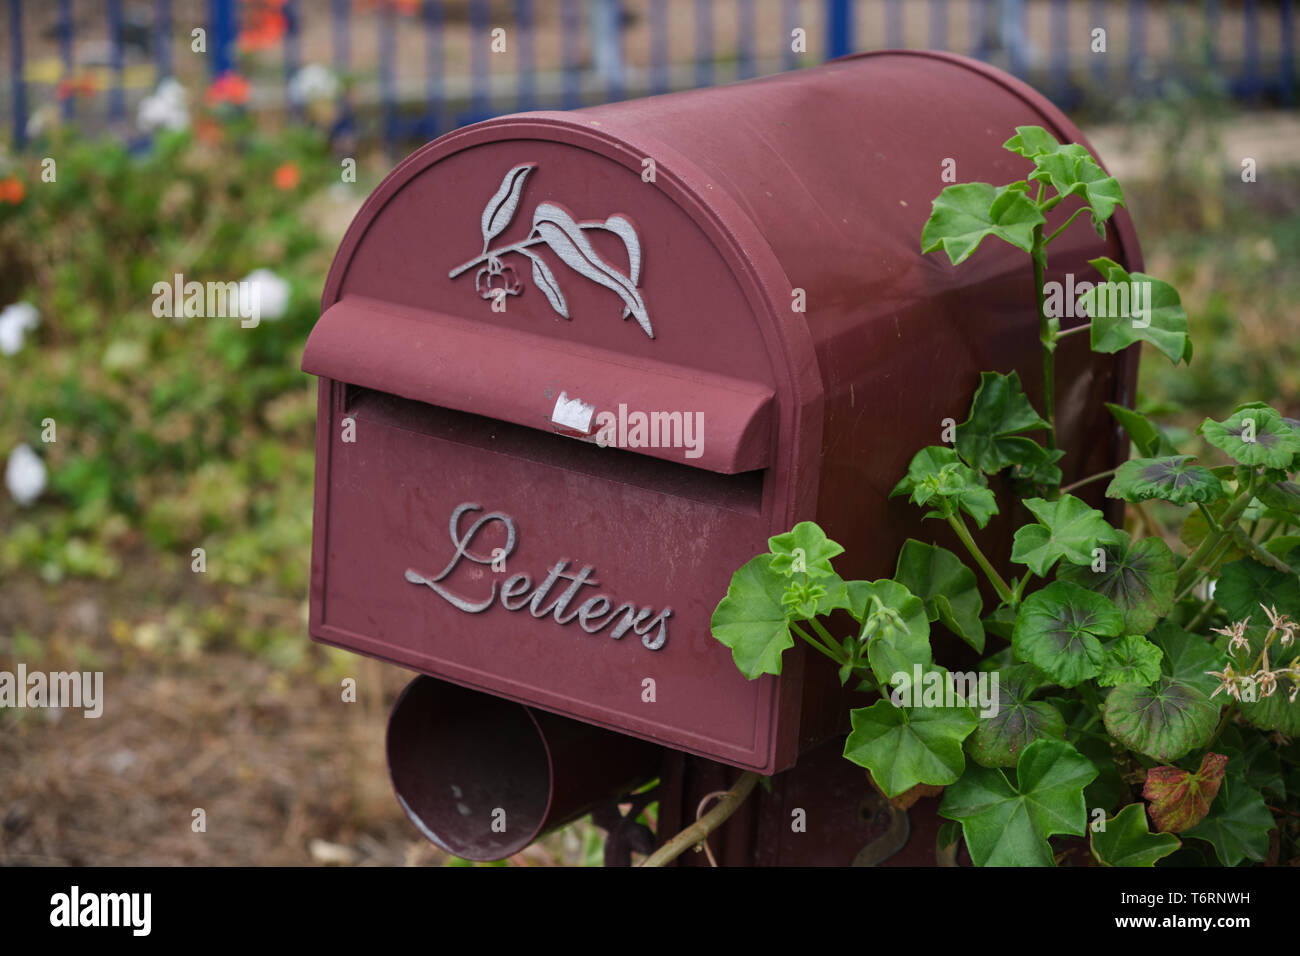 Purple mail box / letter box marked with 'Letters' on front with green leaves in foreground and flower bushes in background Stock Photo